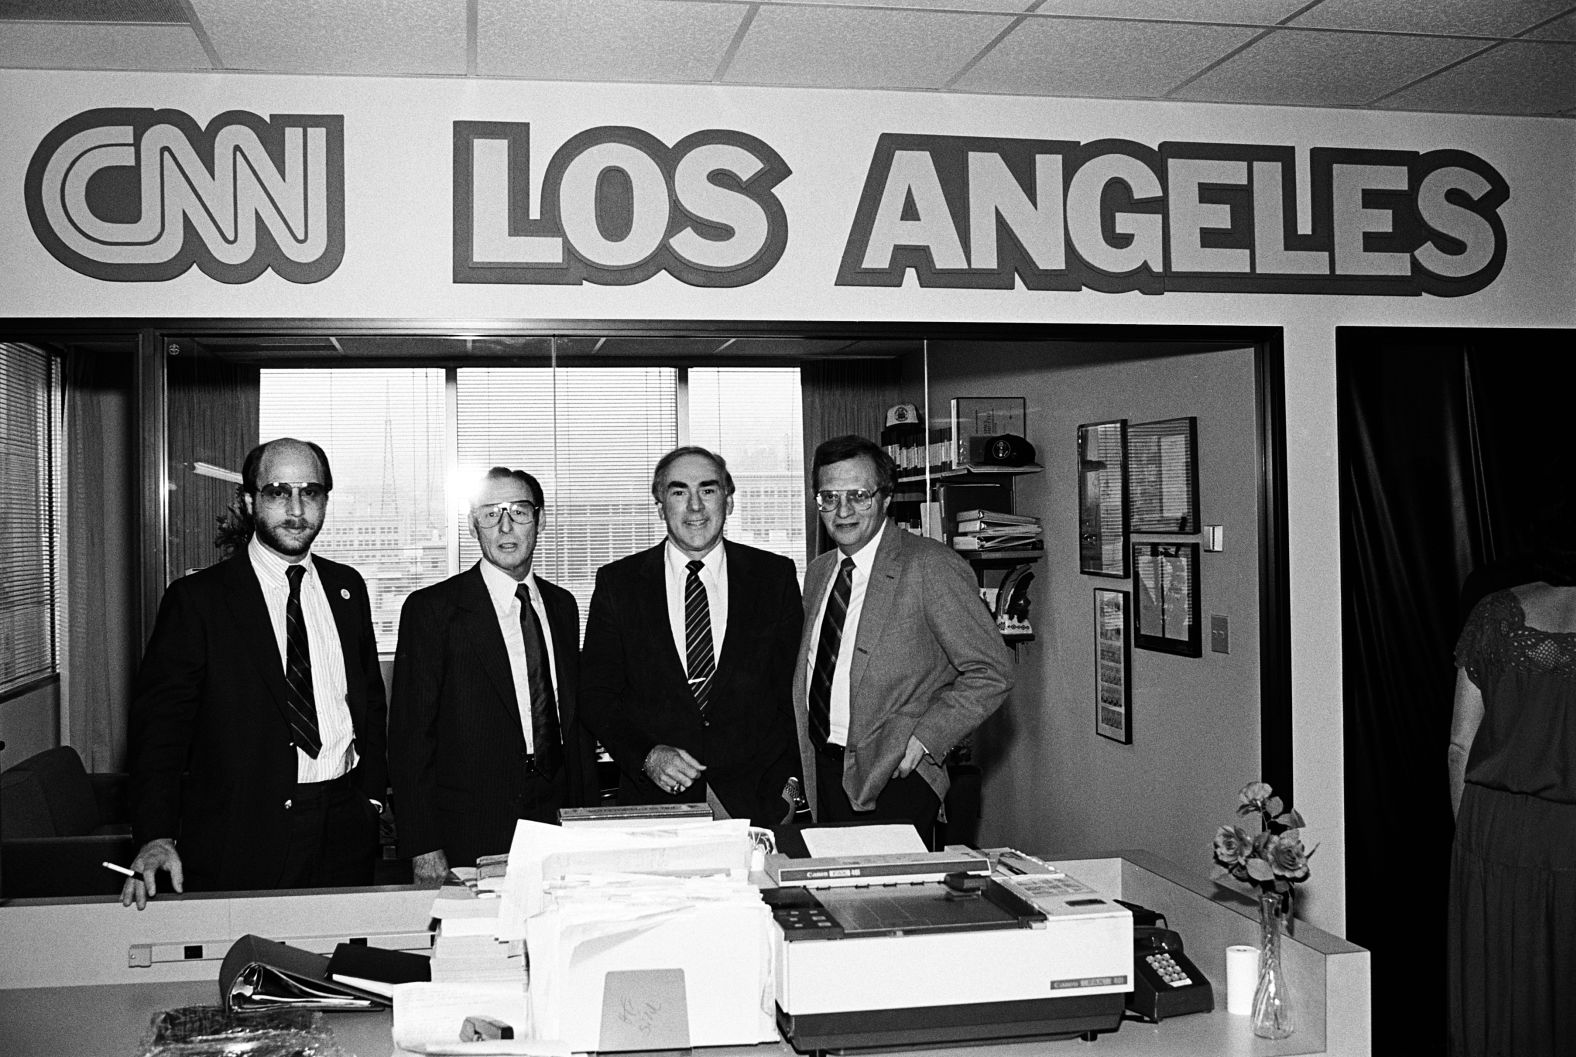 King, right, joined CNN in 1985. He started his career as a radio DJ in Miami in 1957. His late-night radio talk show, "The Larry King Show," debuted in 1978 and was nationally syndicated.